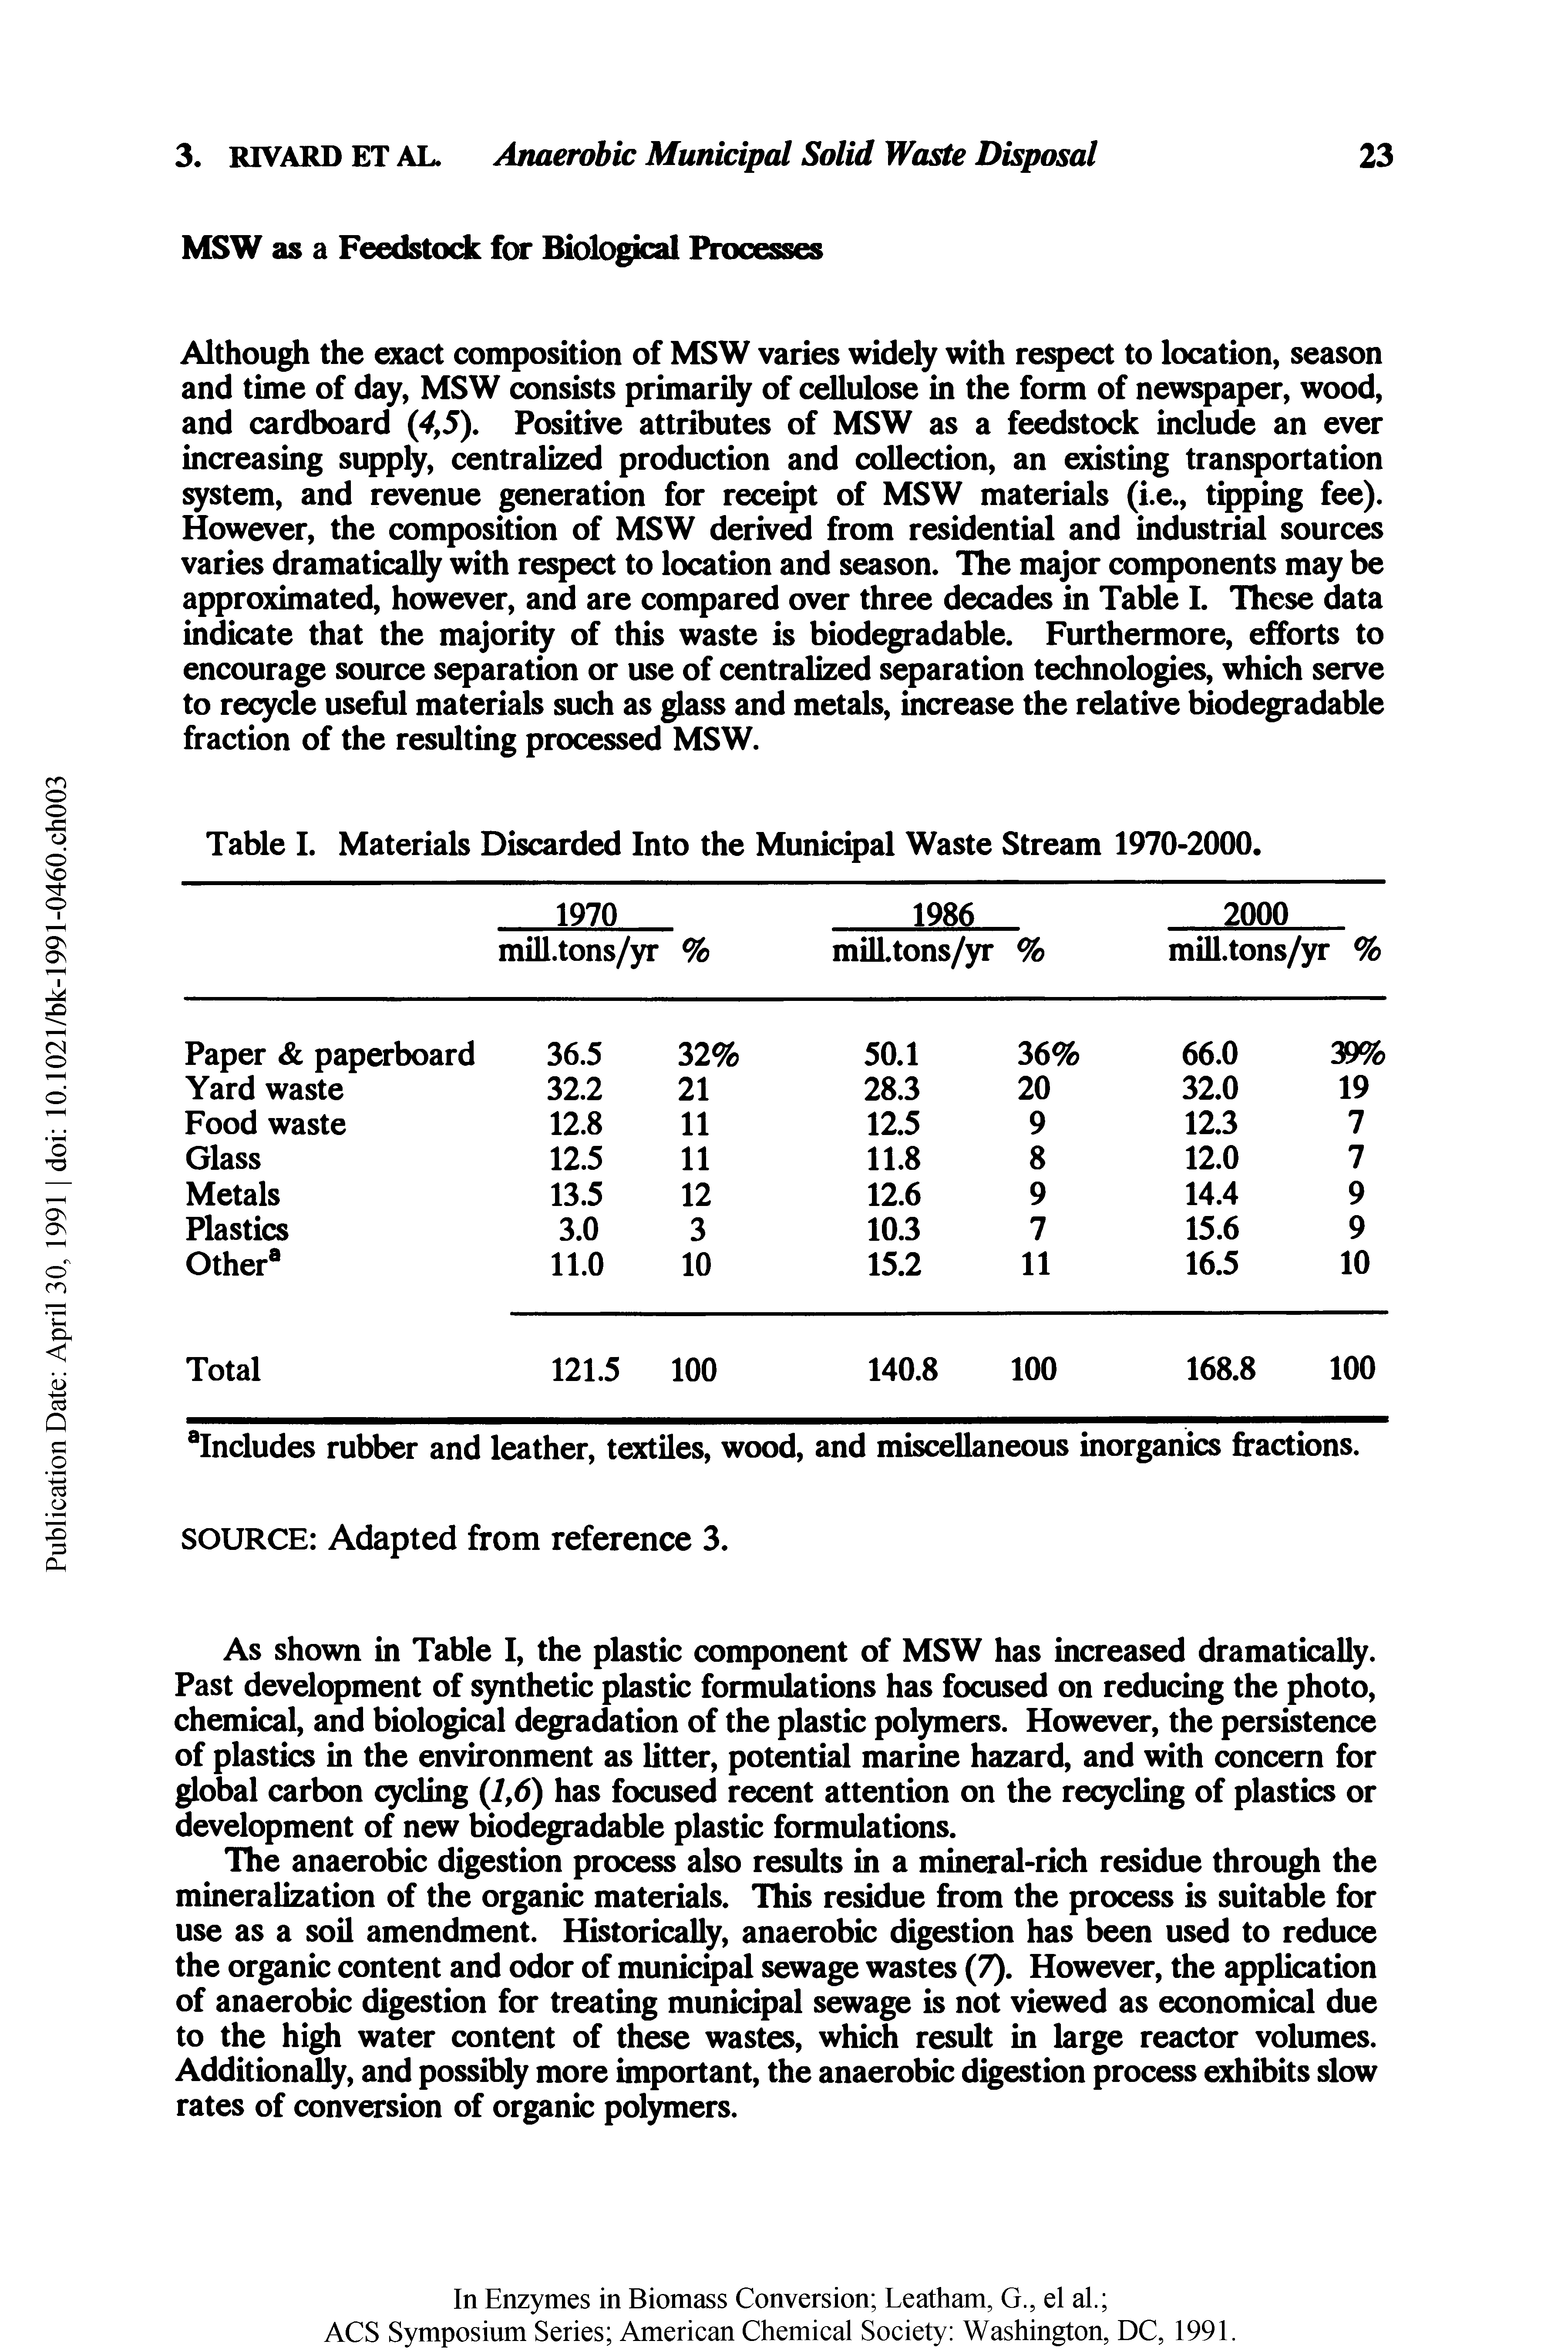 Table I. Materials Discarded Into the Municipal Waste Stream 1970-2000.